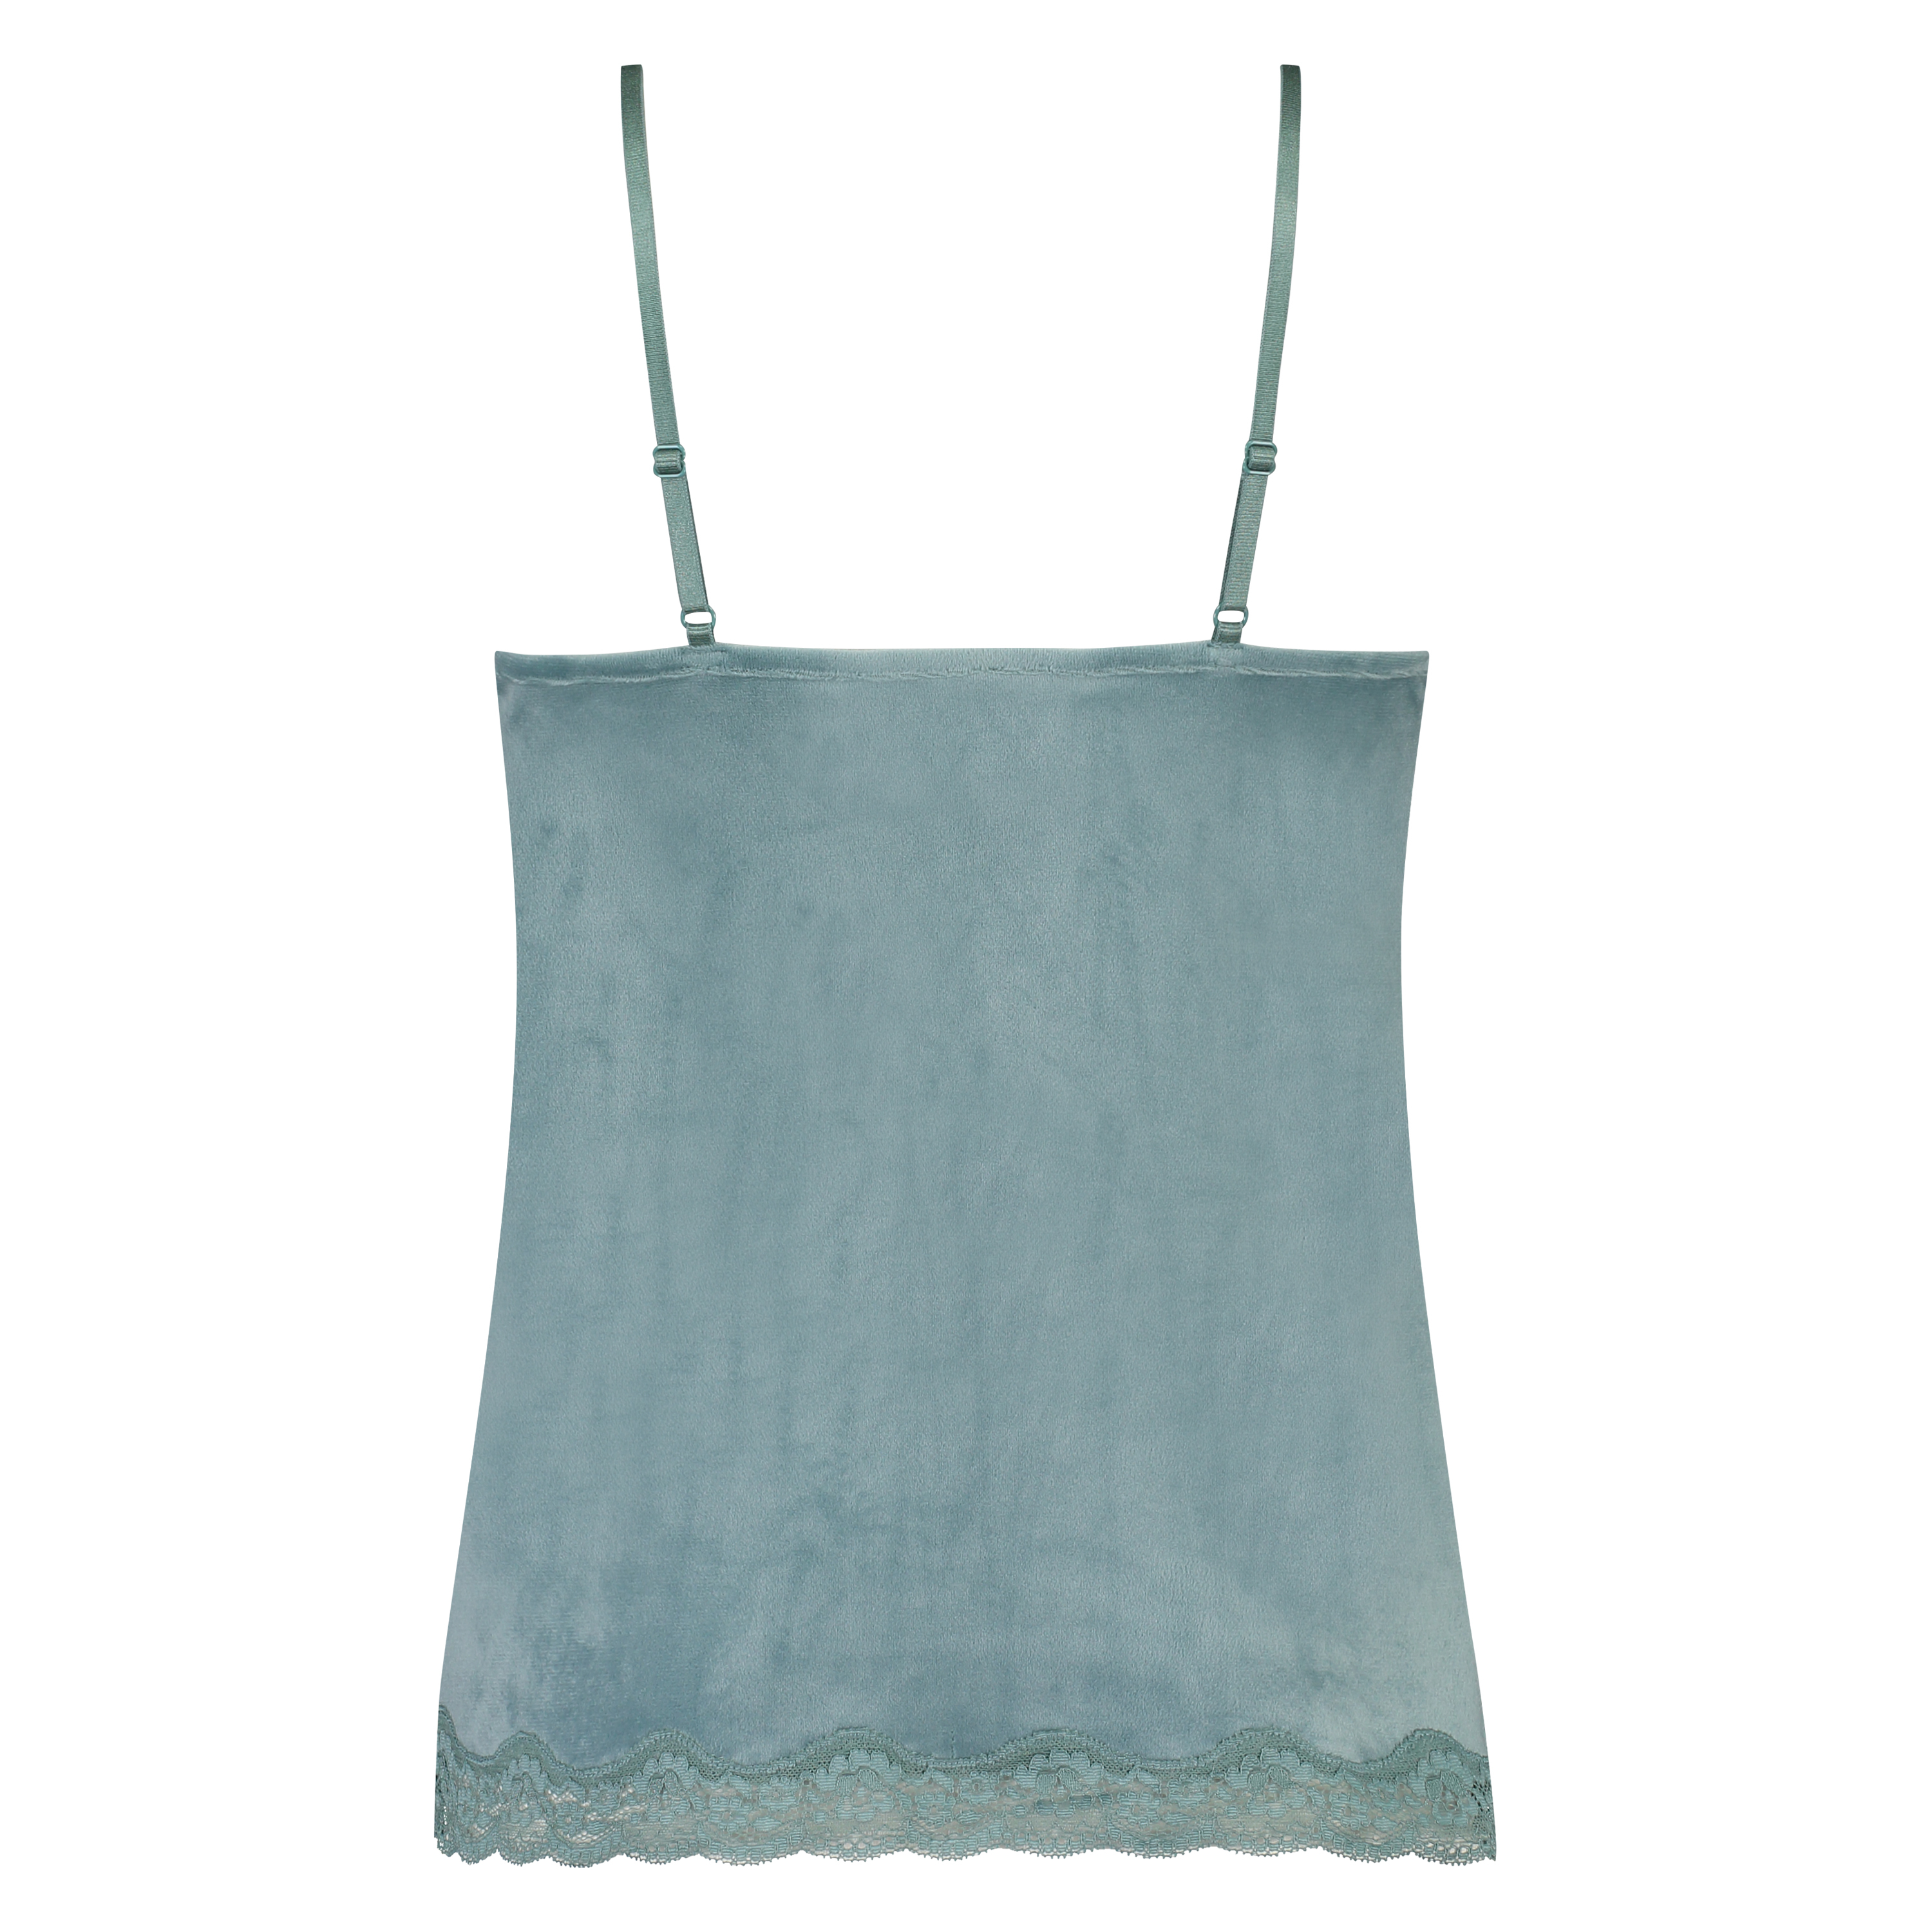 Cami Velours Lace, Groen, main